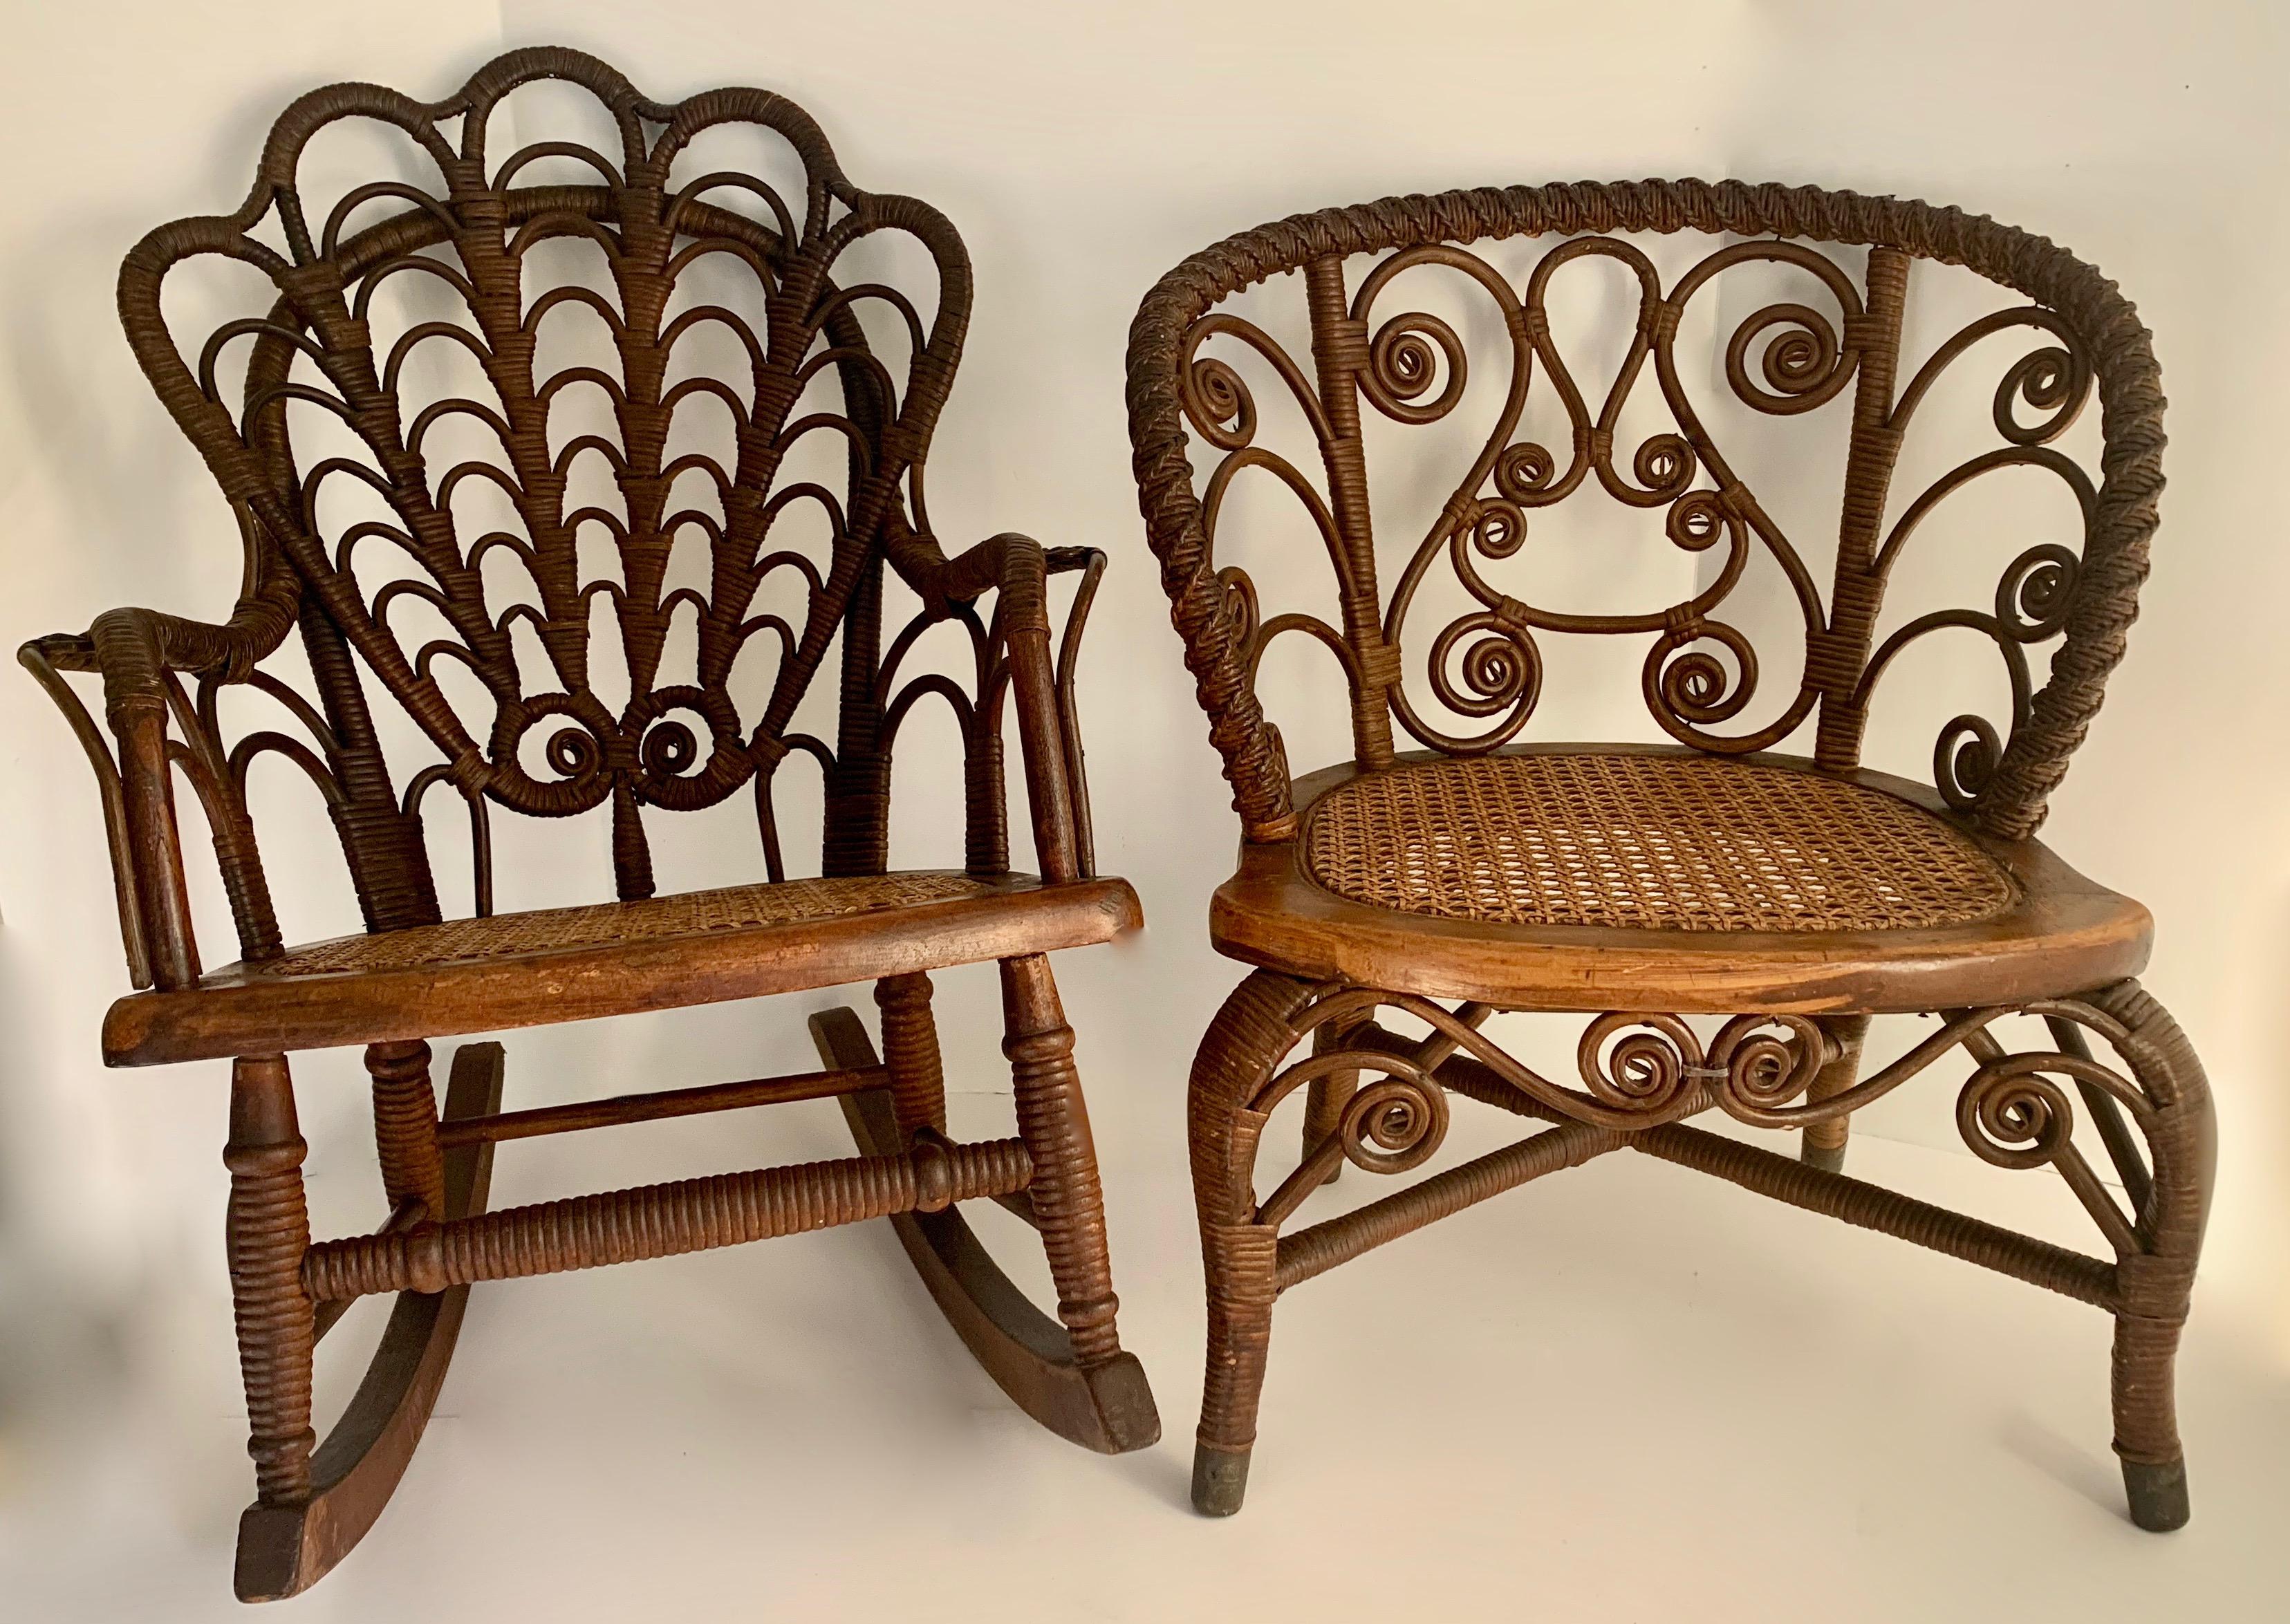 An exceptional pair of Wicker for a Childs room or patio. The pair make the best companion to the childrens room, male or female. Have a tea party or eat at the kids table in style. Children gifts, Holiday, kids furniture 

One a stationary chair,